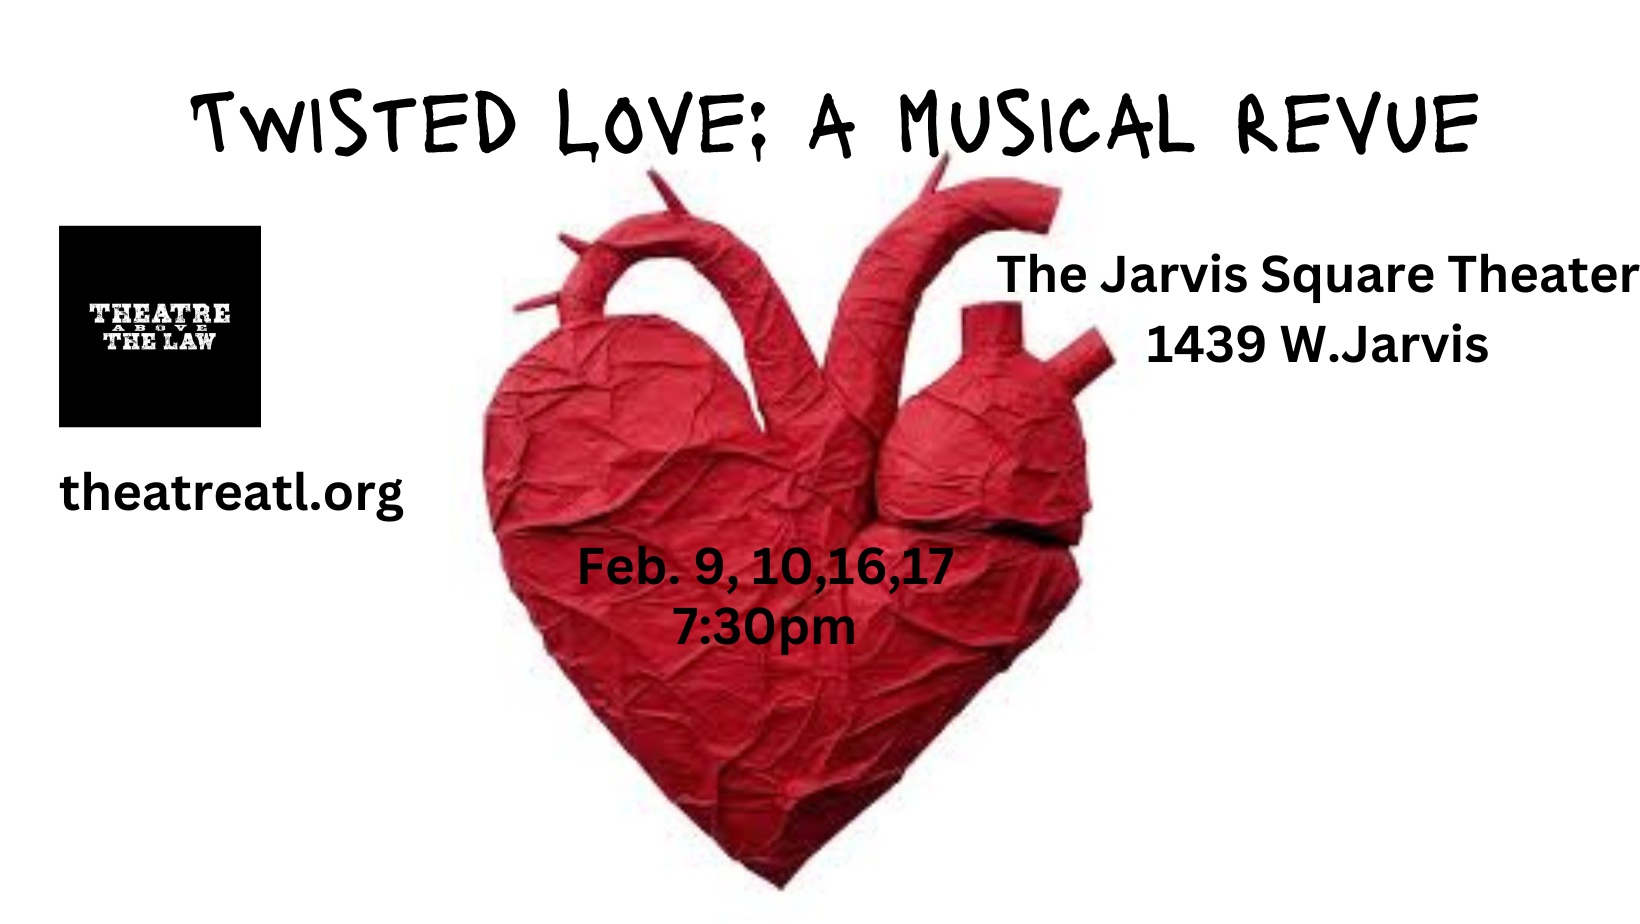 Twisted Love: a musical revue